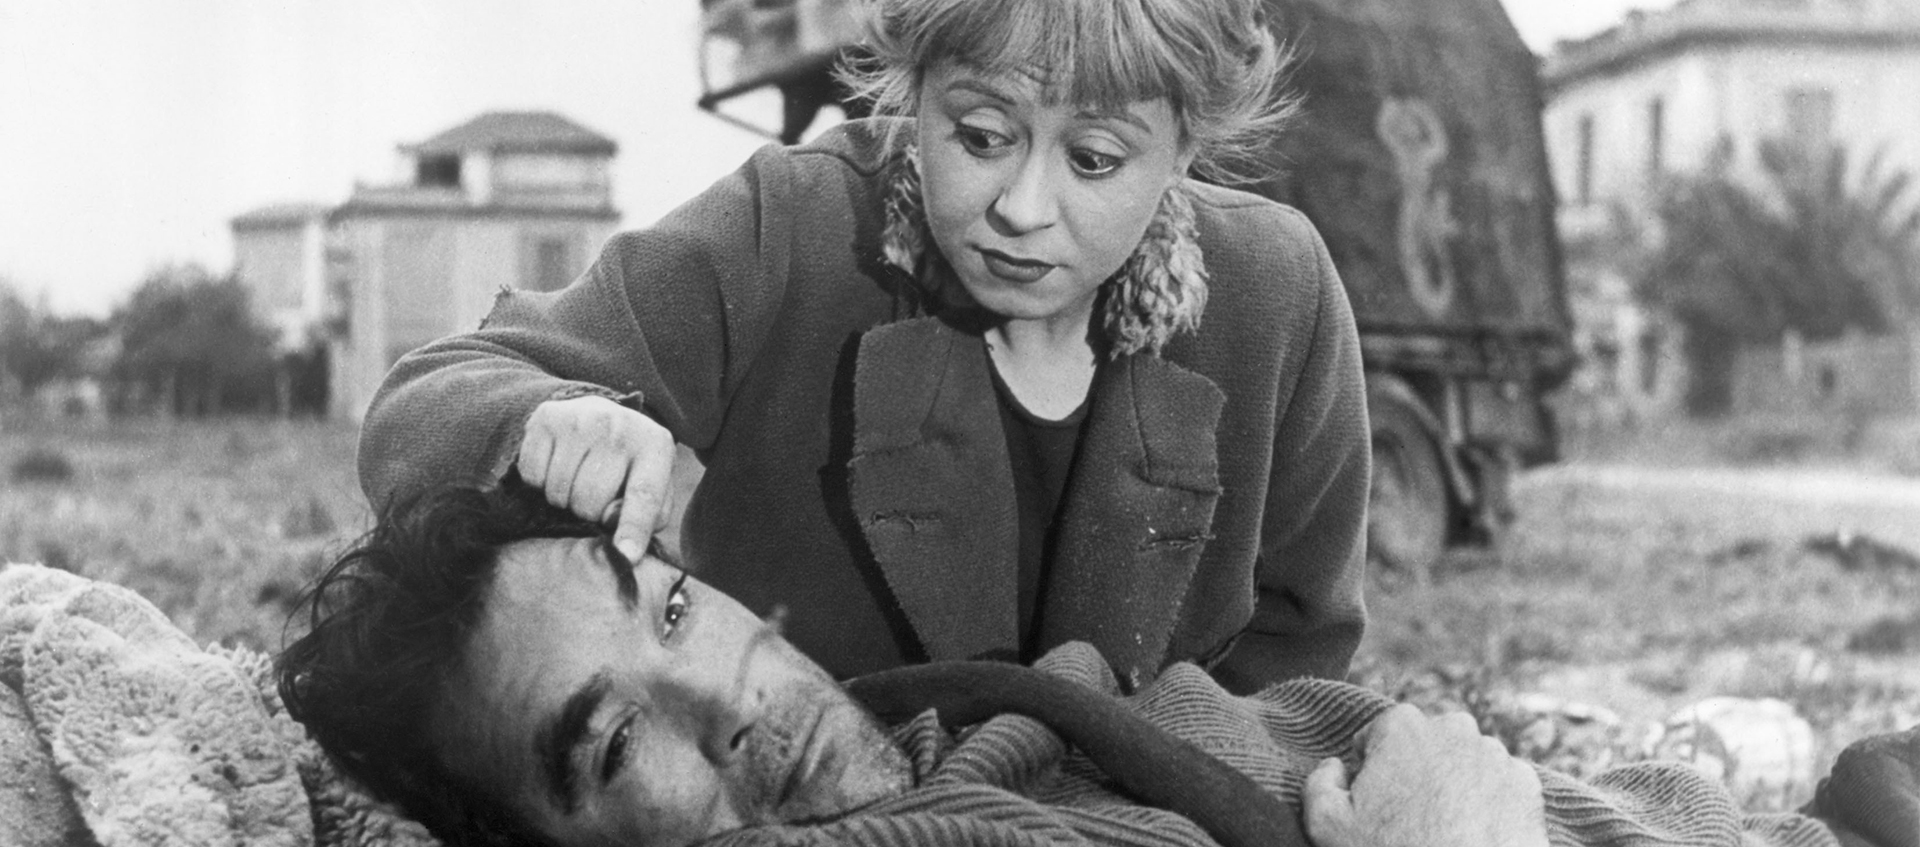 Black-and-white still of Gelsomina (Giulietta Masina) and Zampanò (Anthony Quinn) in a field. Zampanò is lying on the ground, and Gelsomina is crouched behind him, pulling his left eye open with her forefinger with a worried look on her face.